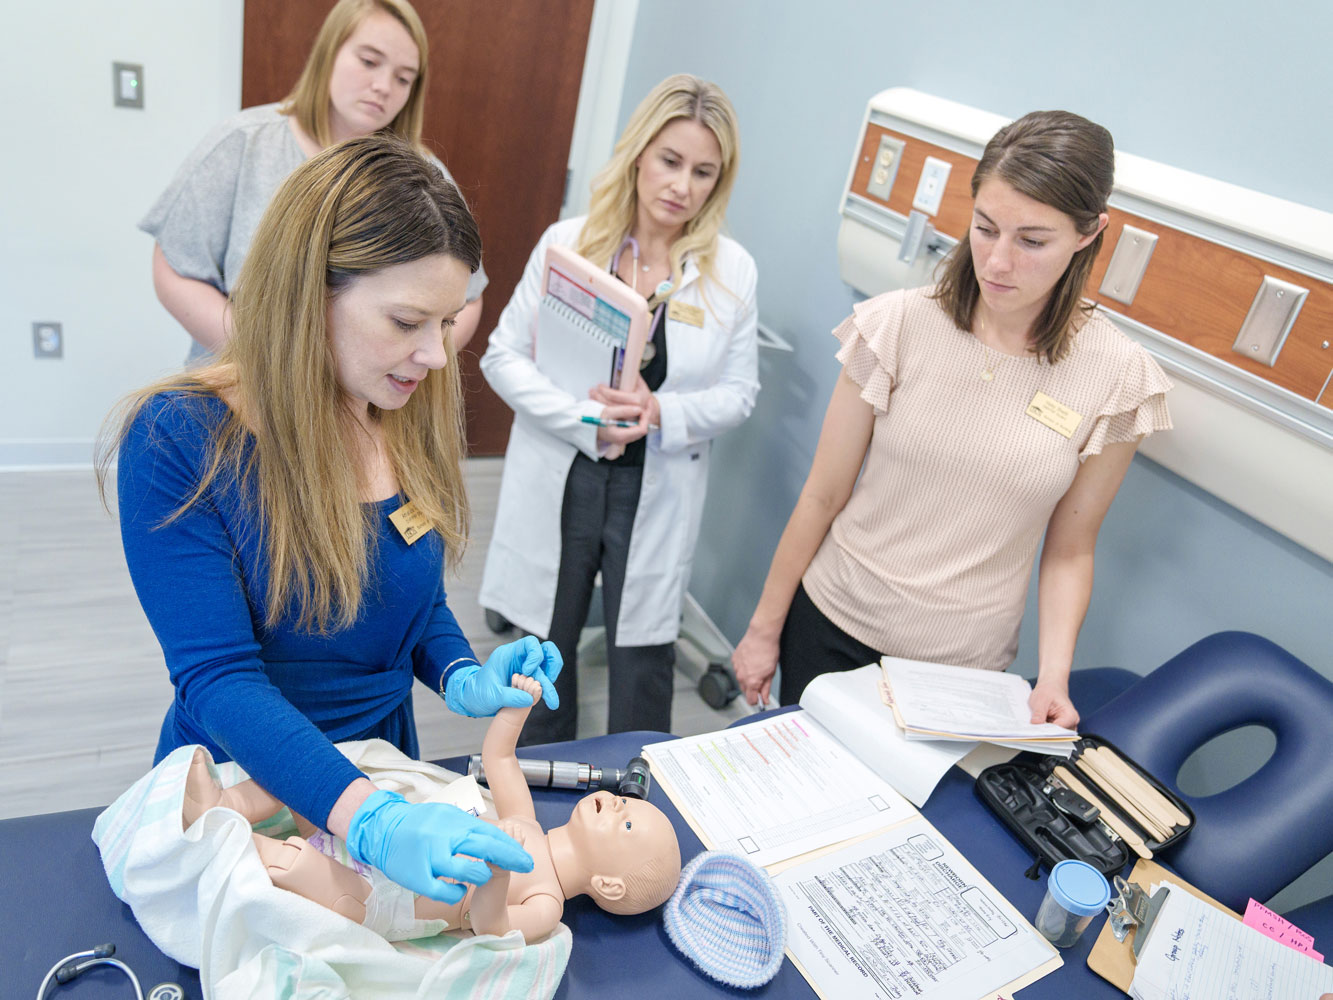 Three DNP students observe one other DNP student as she conducts an assessment on a manikin baby.